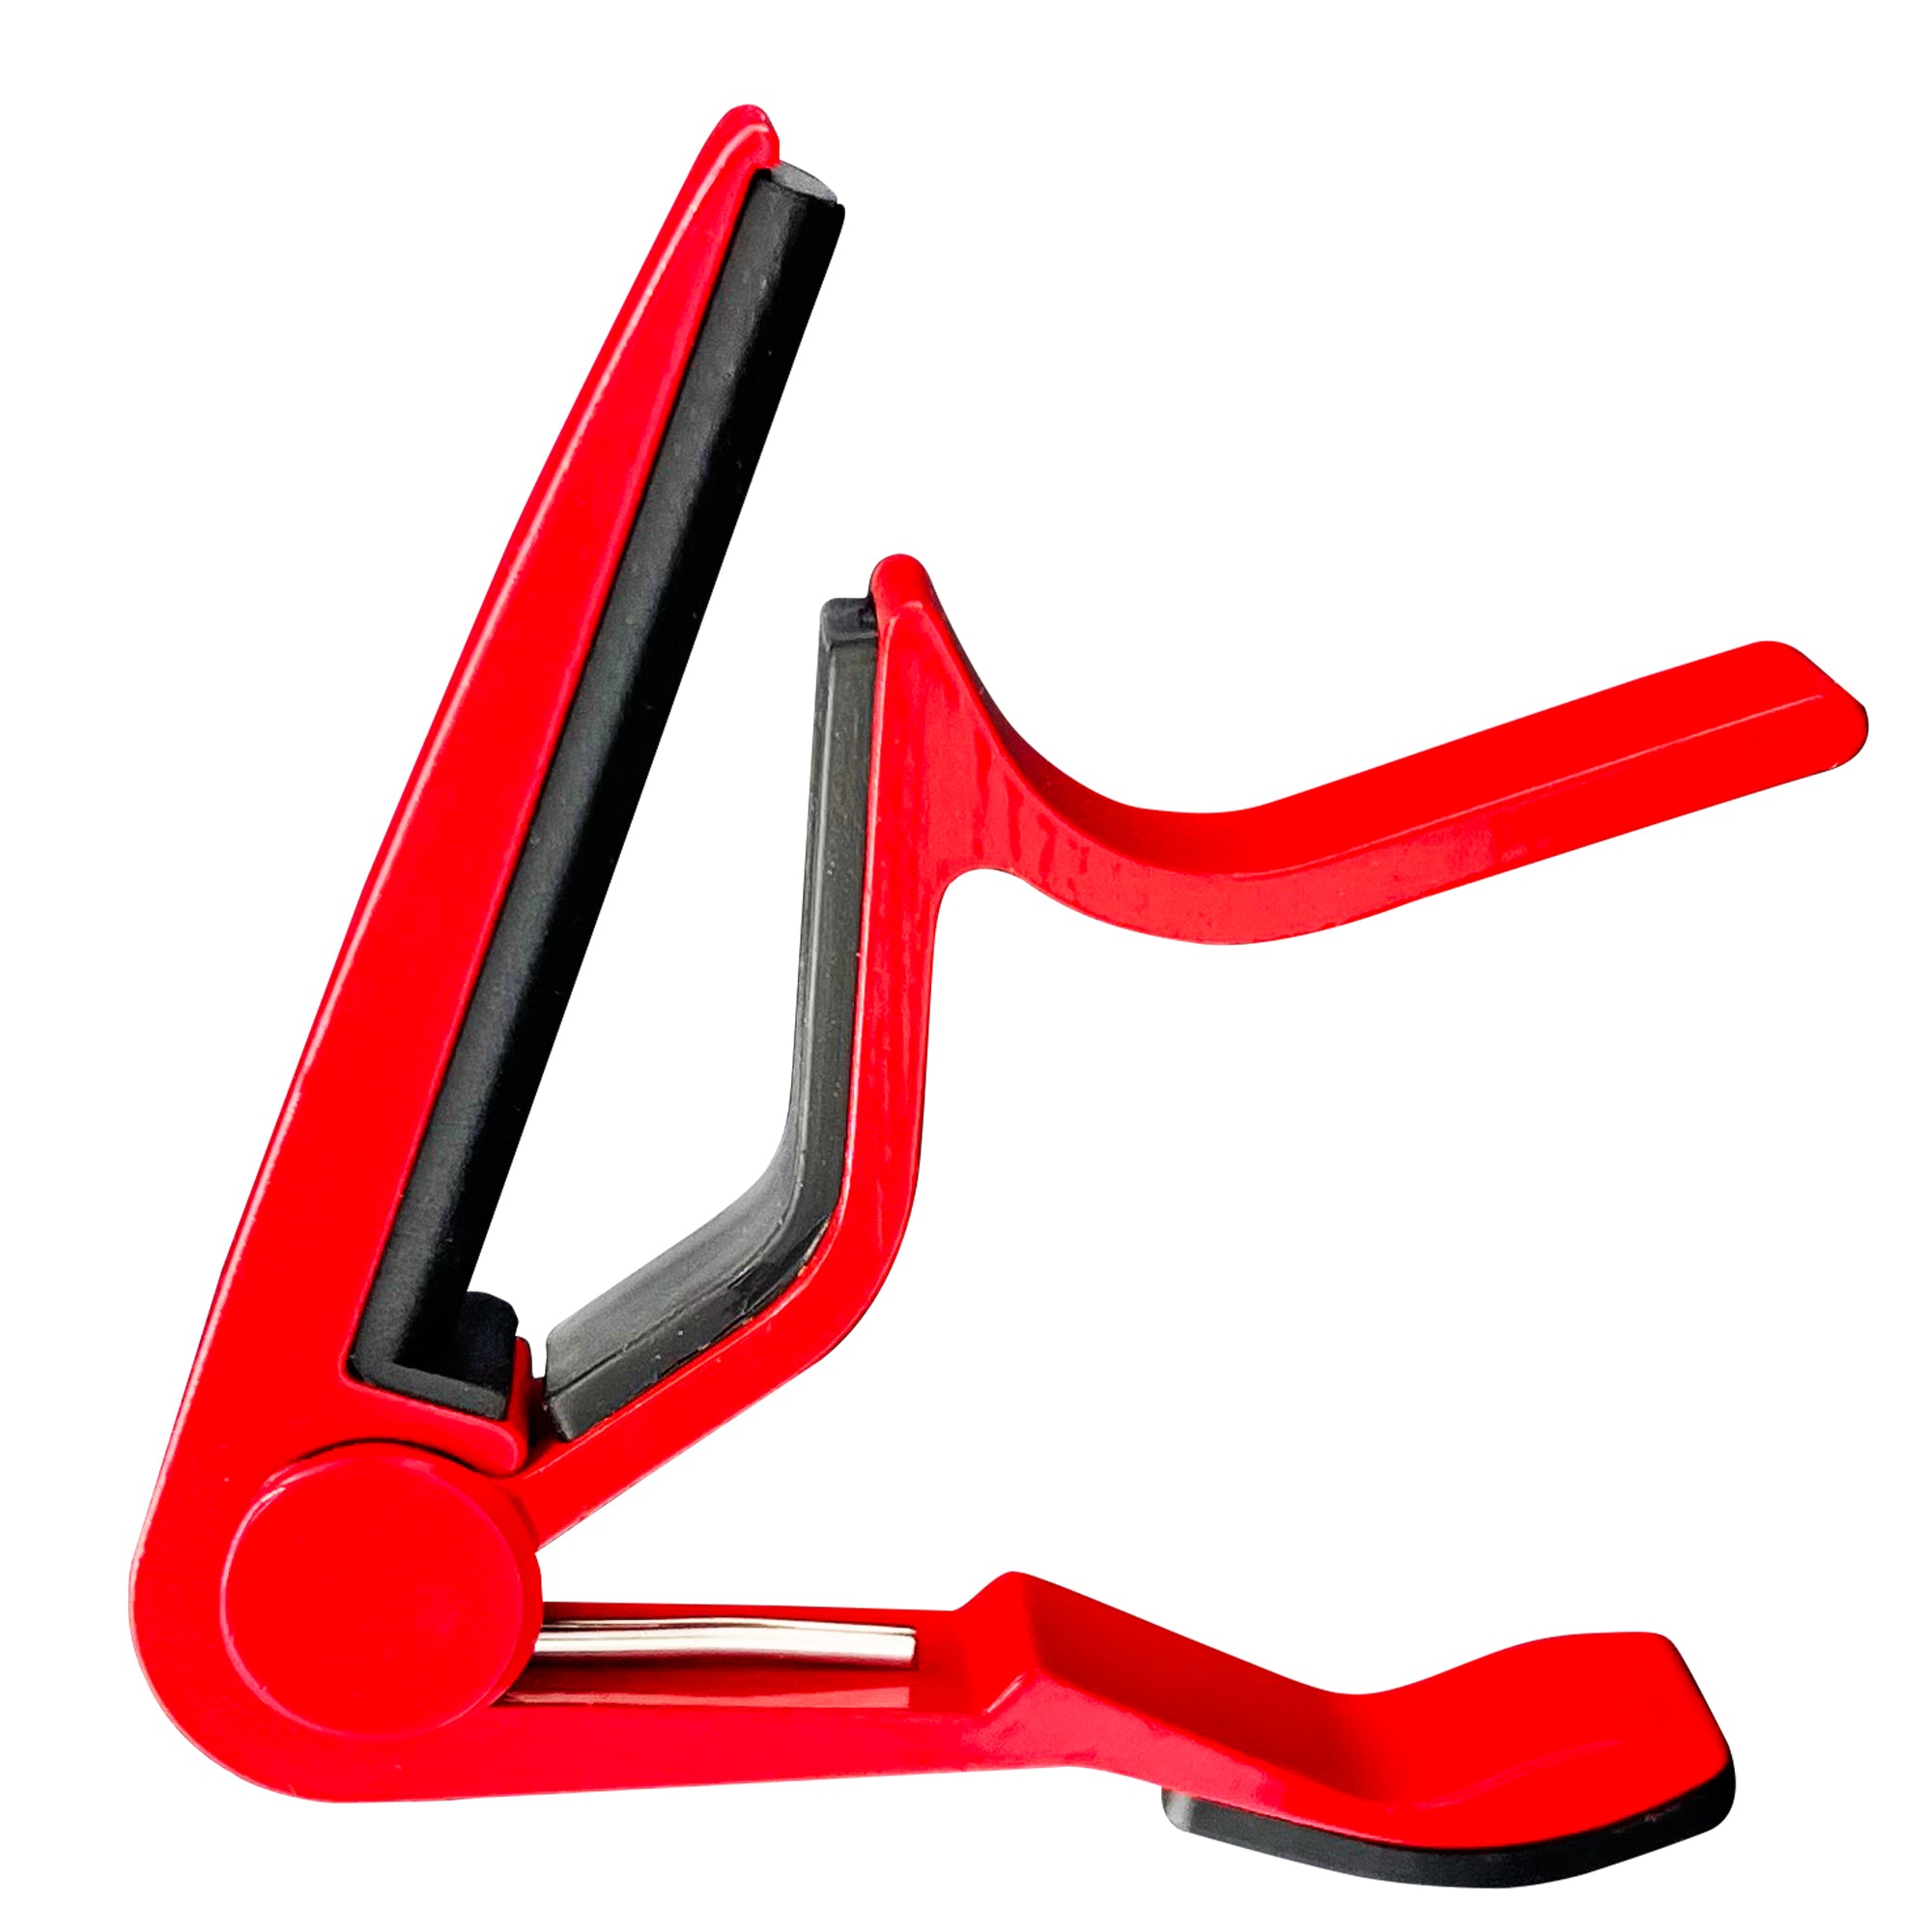 5 Core Guitar Capo Red 6 String Kapo Universal Clamp w Rubber Padding for Acoustic and Electric Guitar